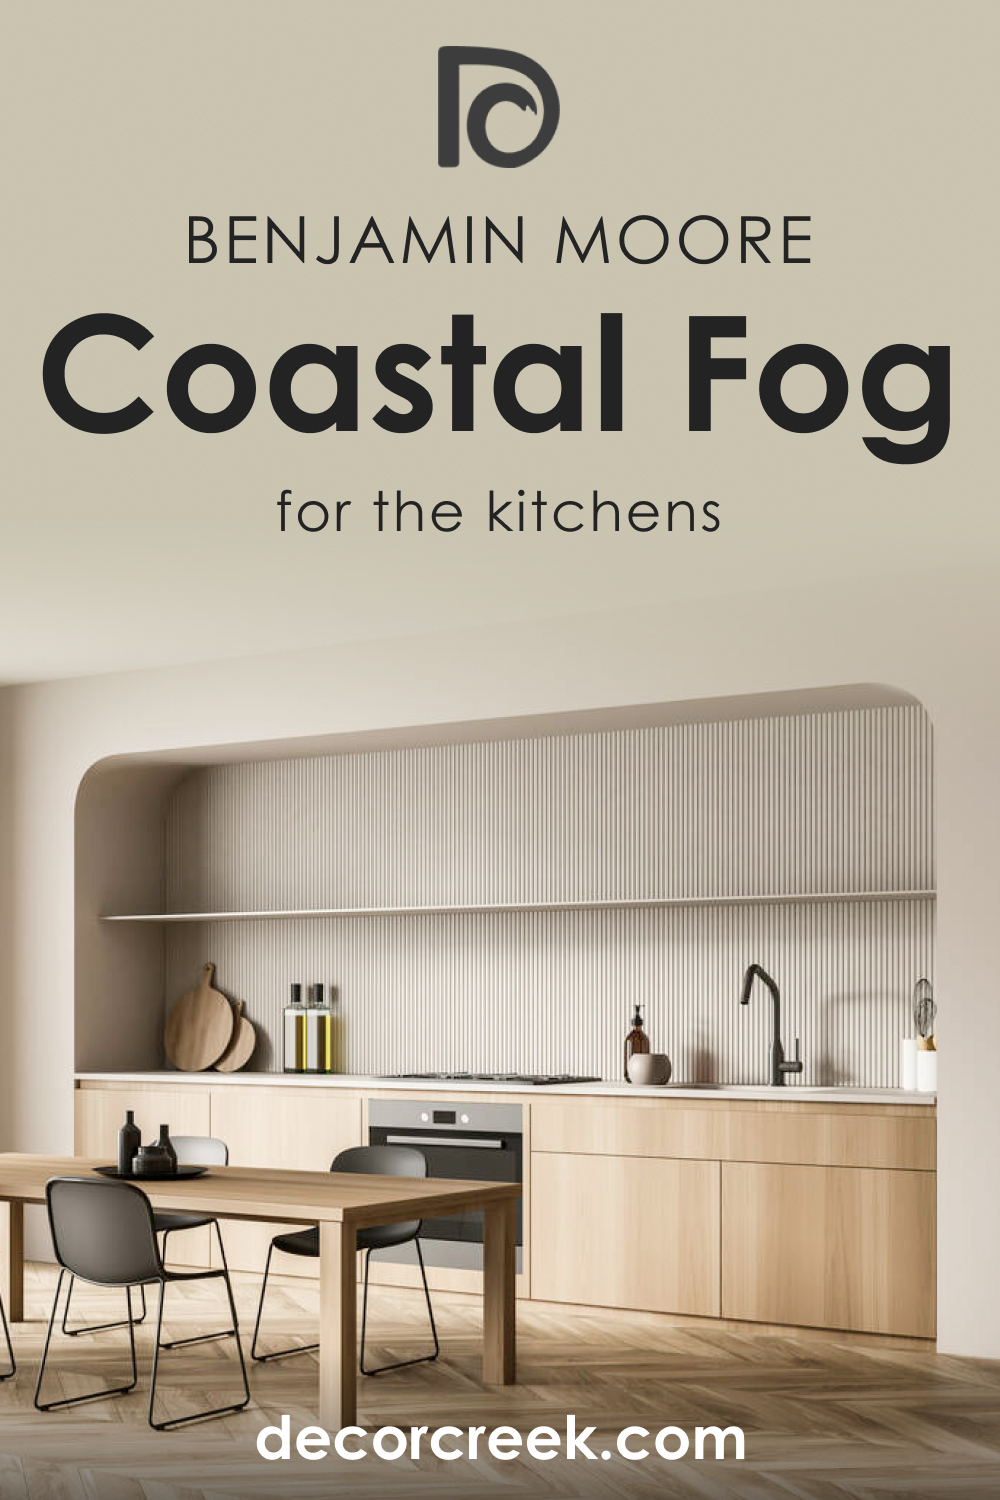 How to Use Coastal Fog AC-1 in the Kitchen?